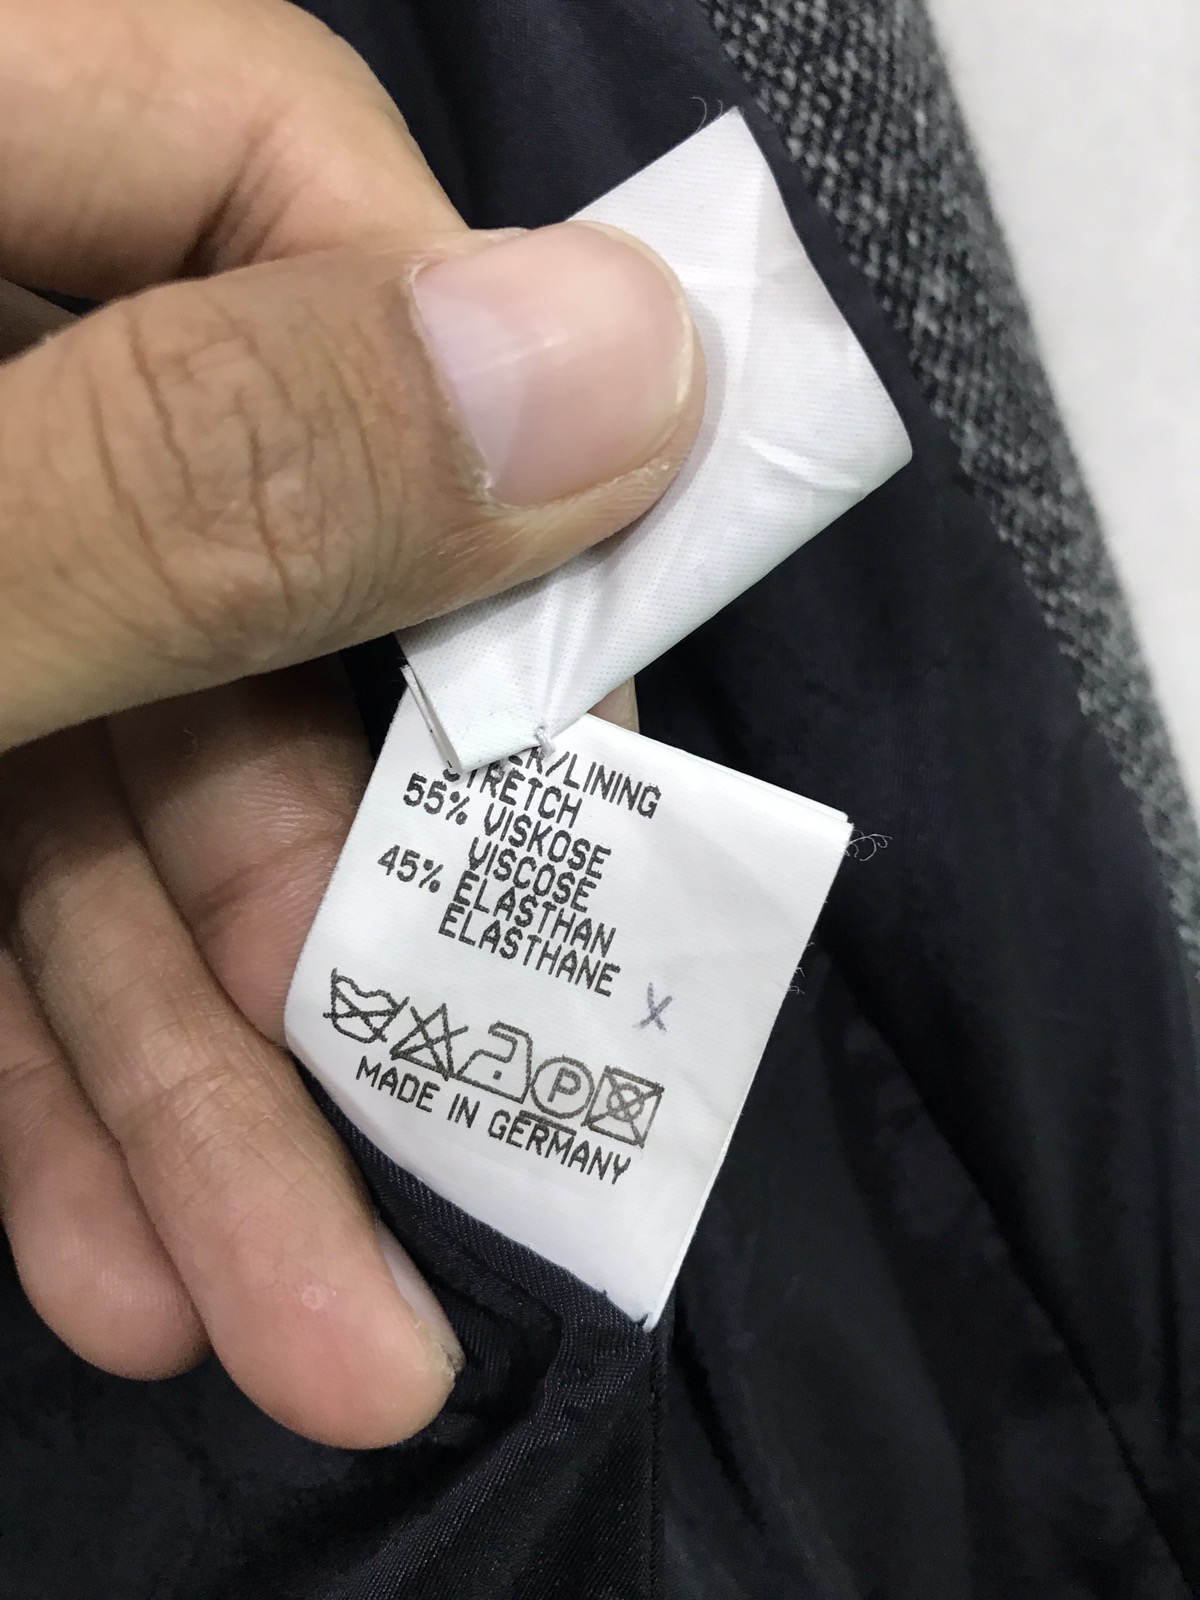 Jacket made in germany - 11